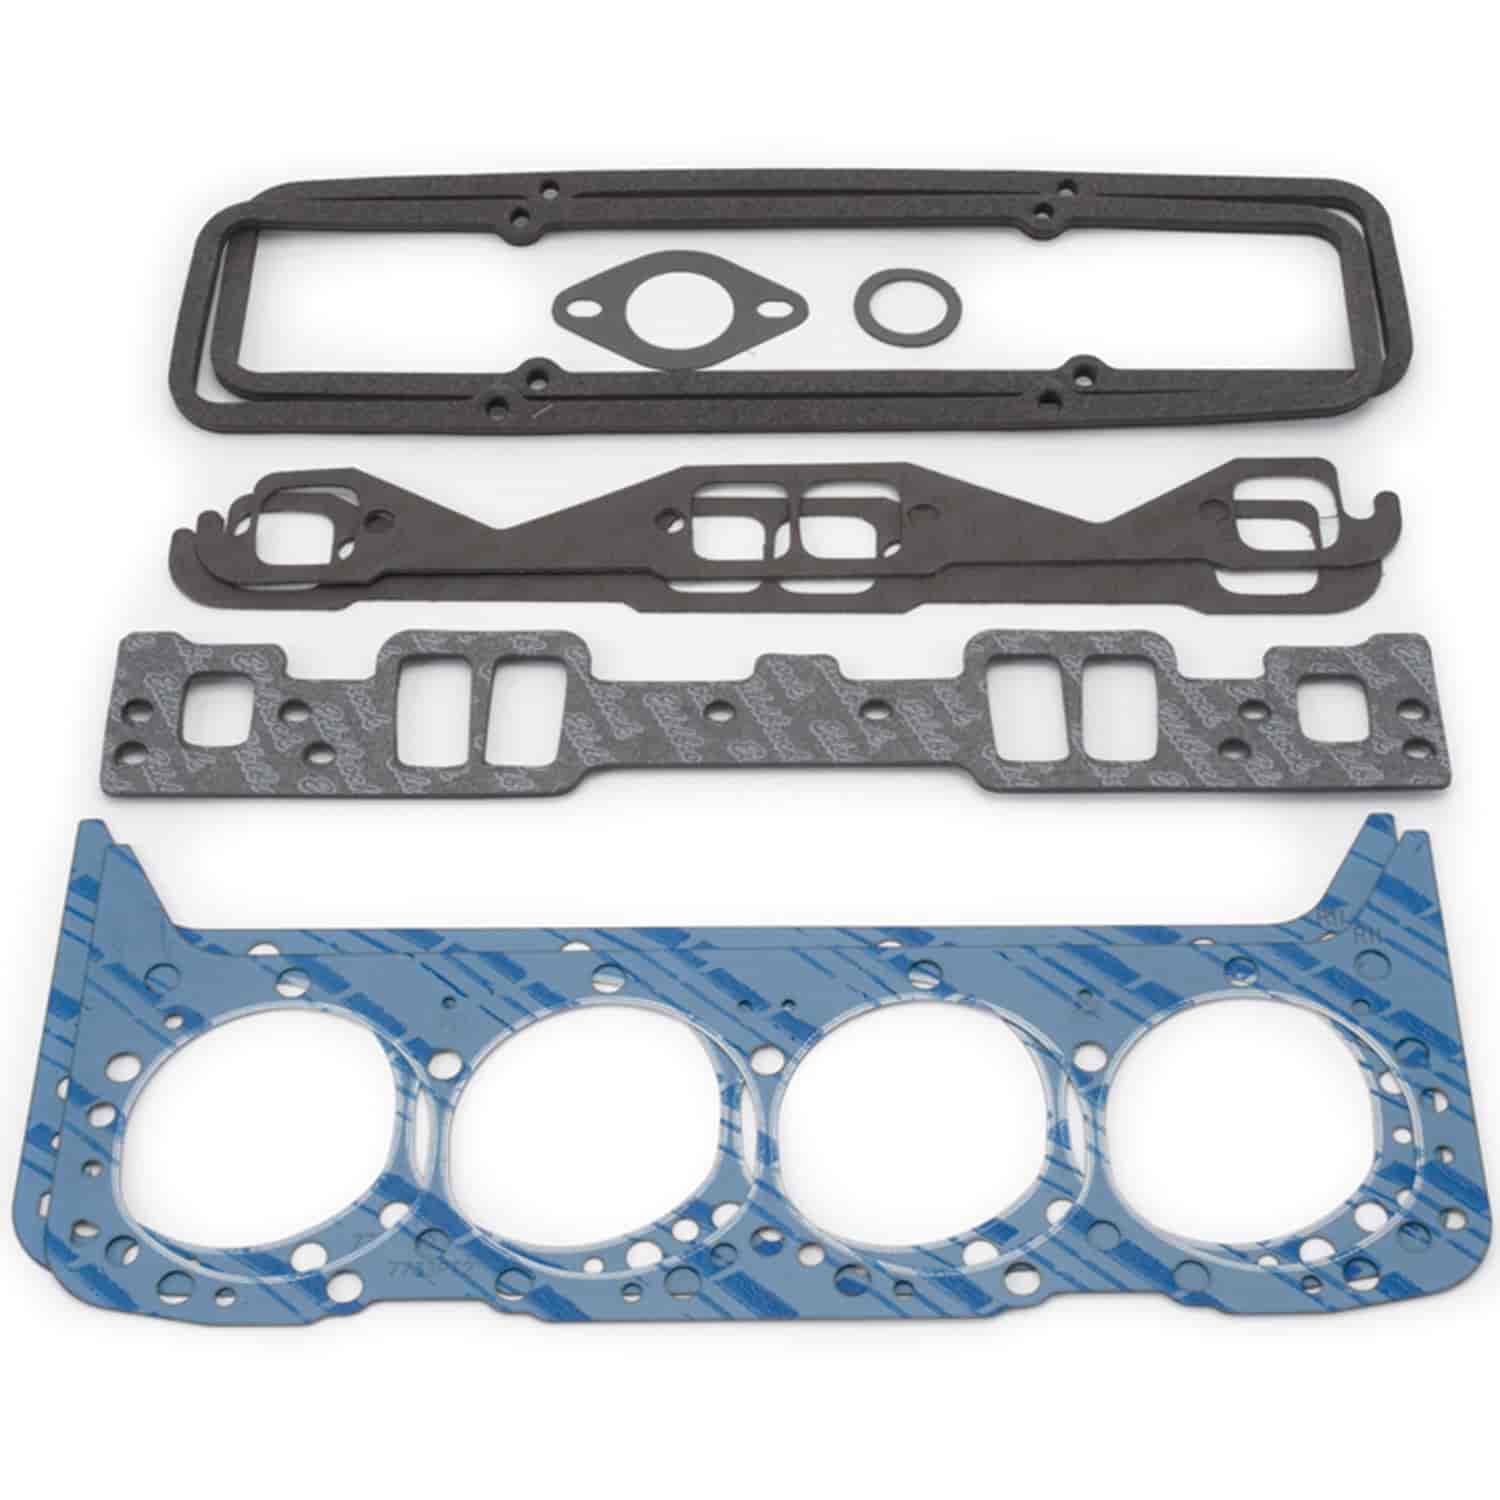 Complete Head Gaskets Set Small Block Chevy with